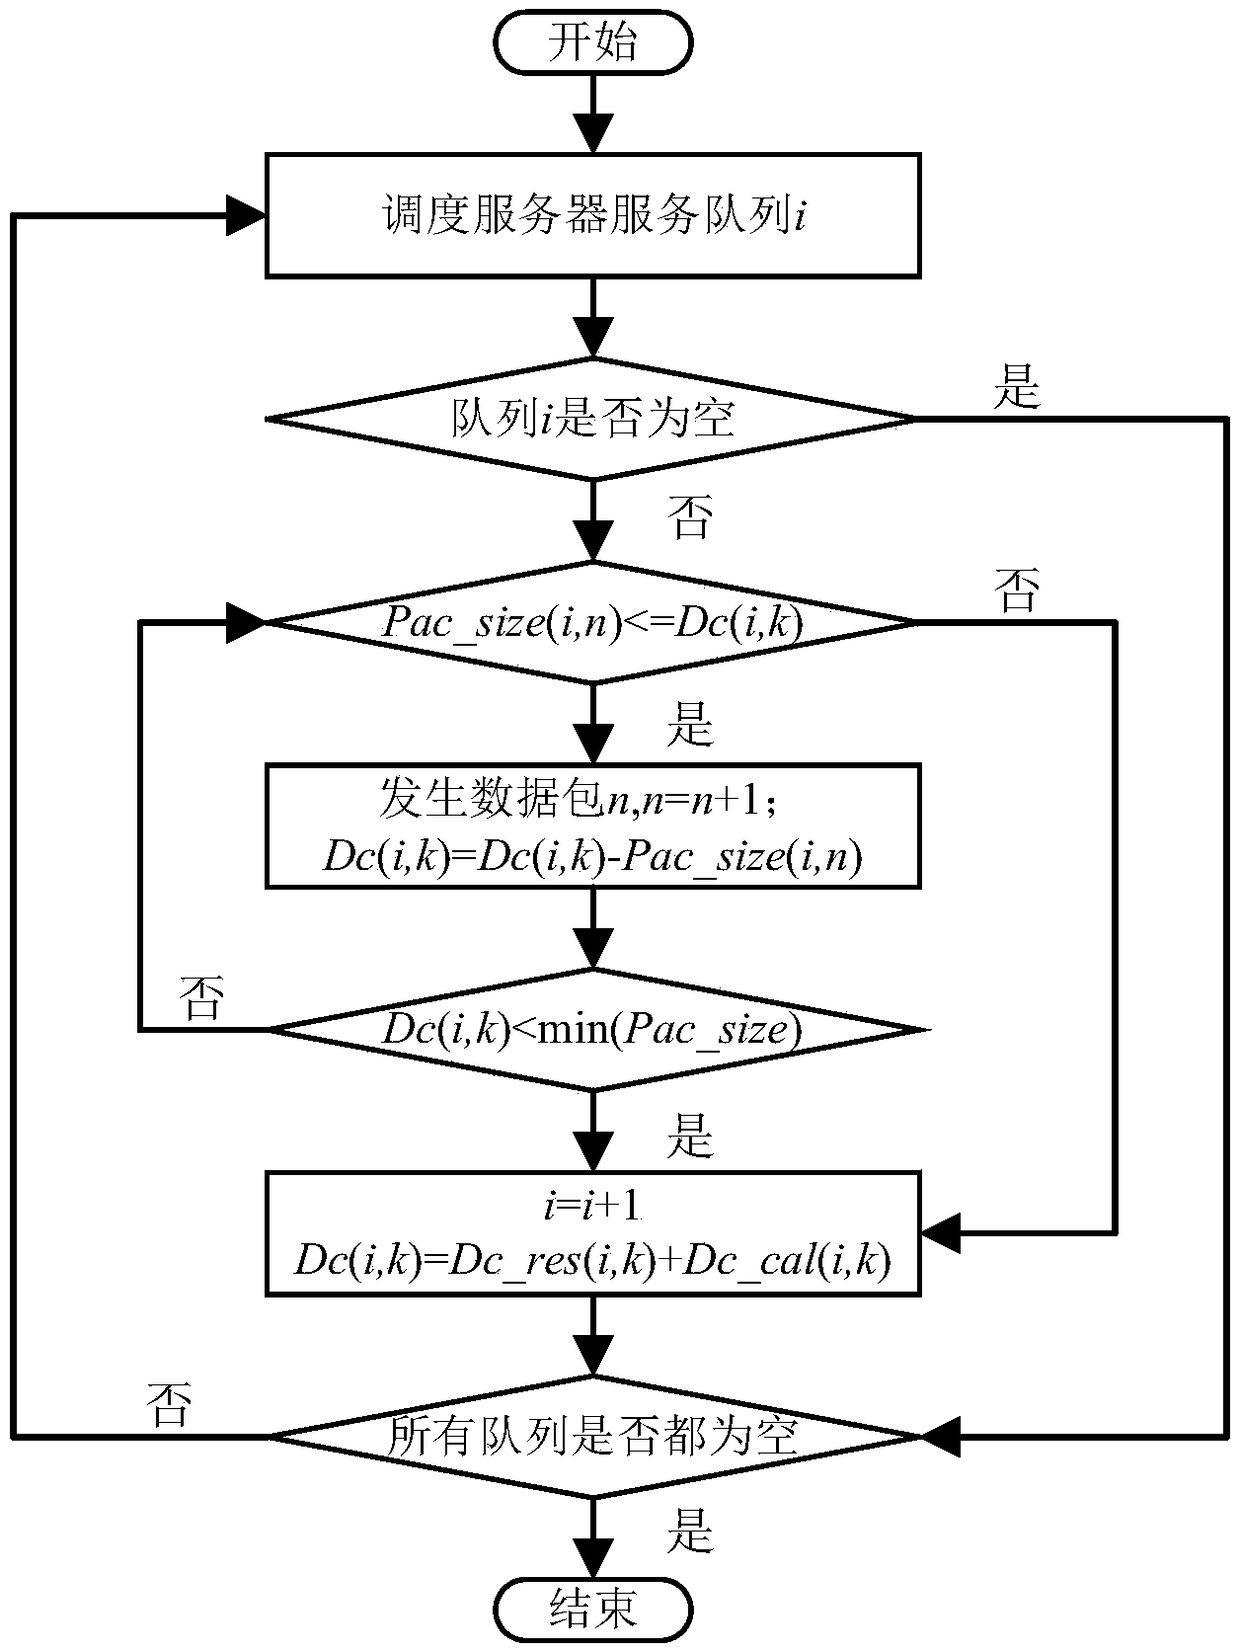 Dynamic deficit weighted round robin scheduling method suitable for mine internet-of-thing multi-service transmission